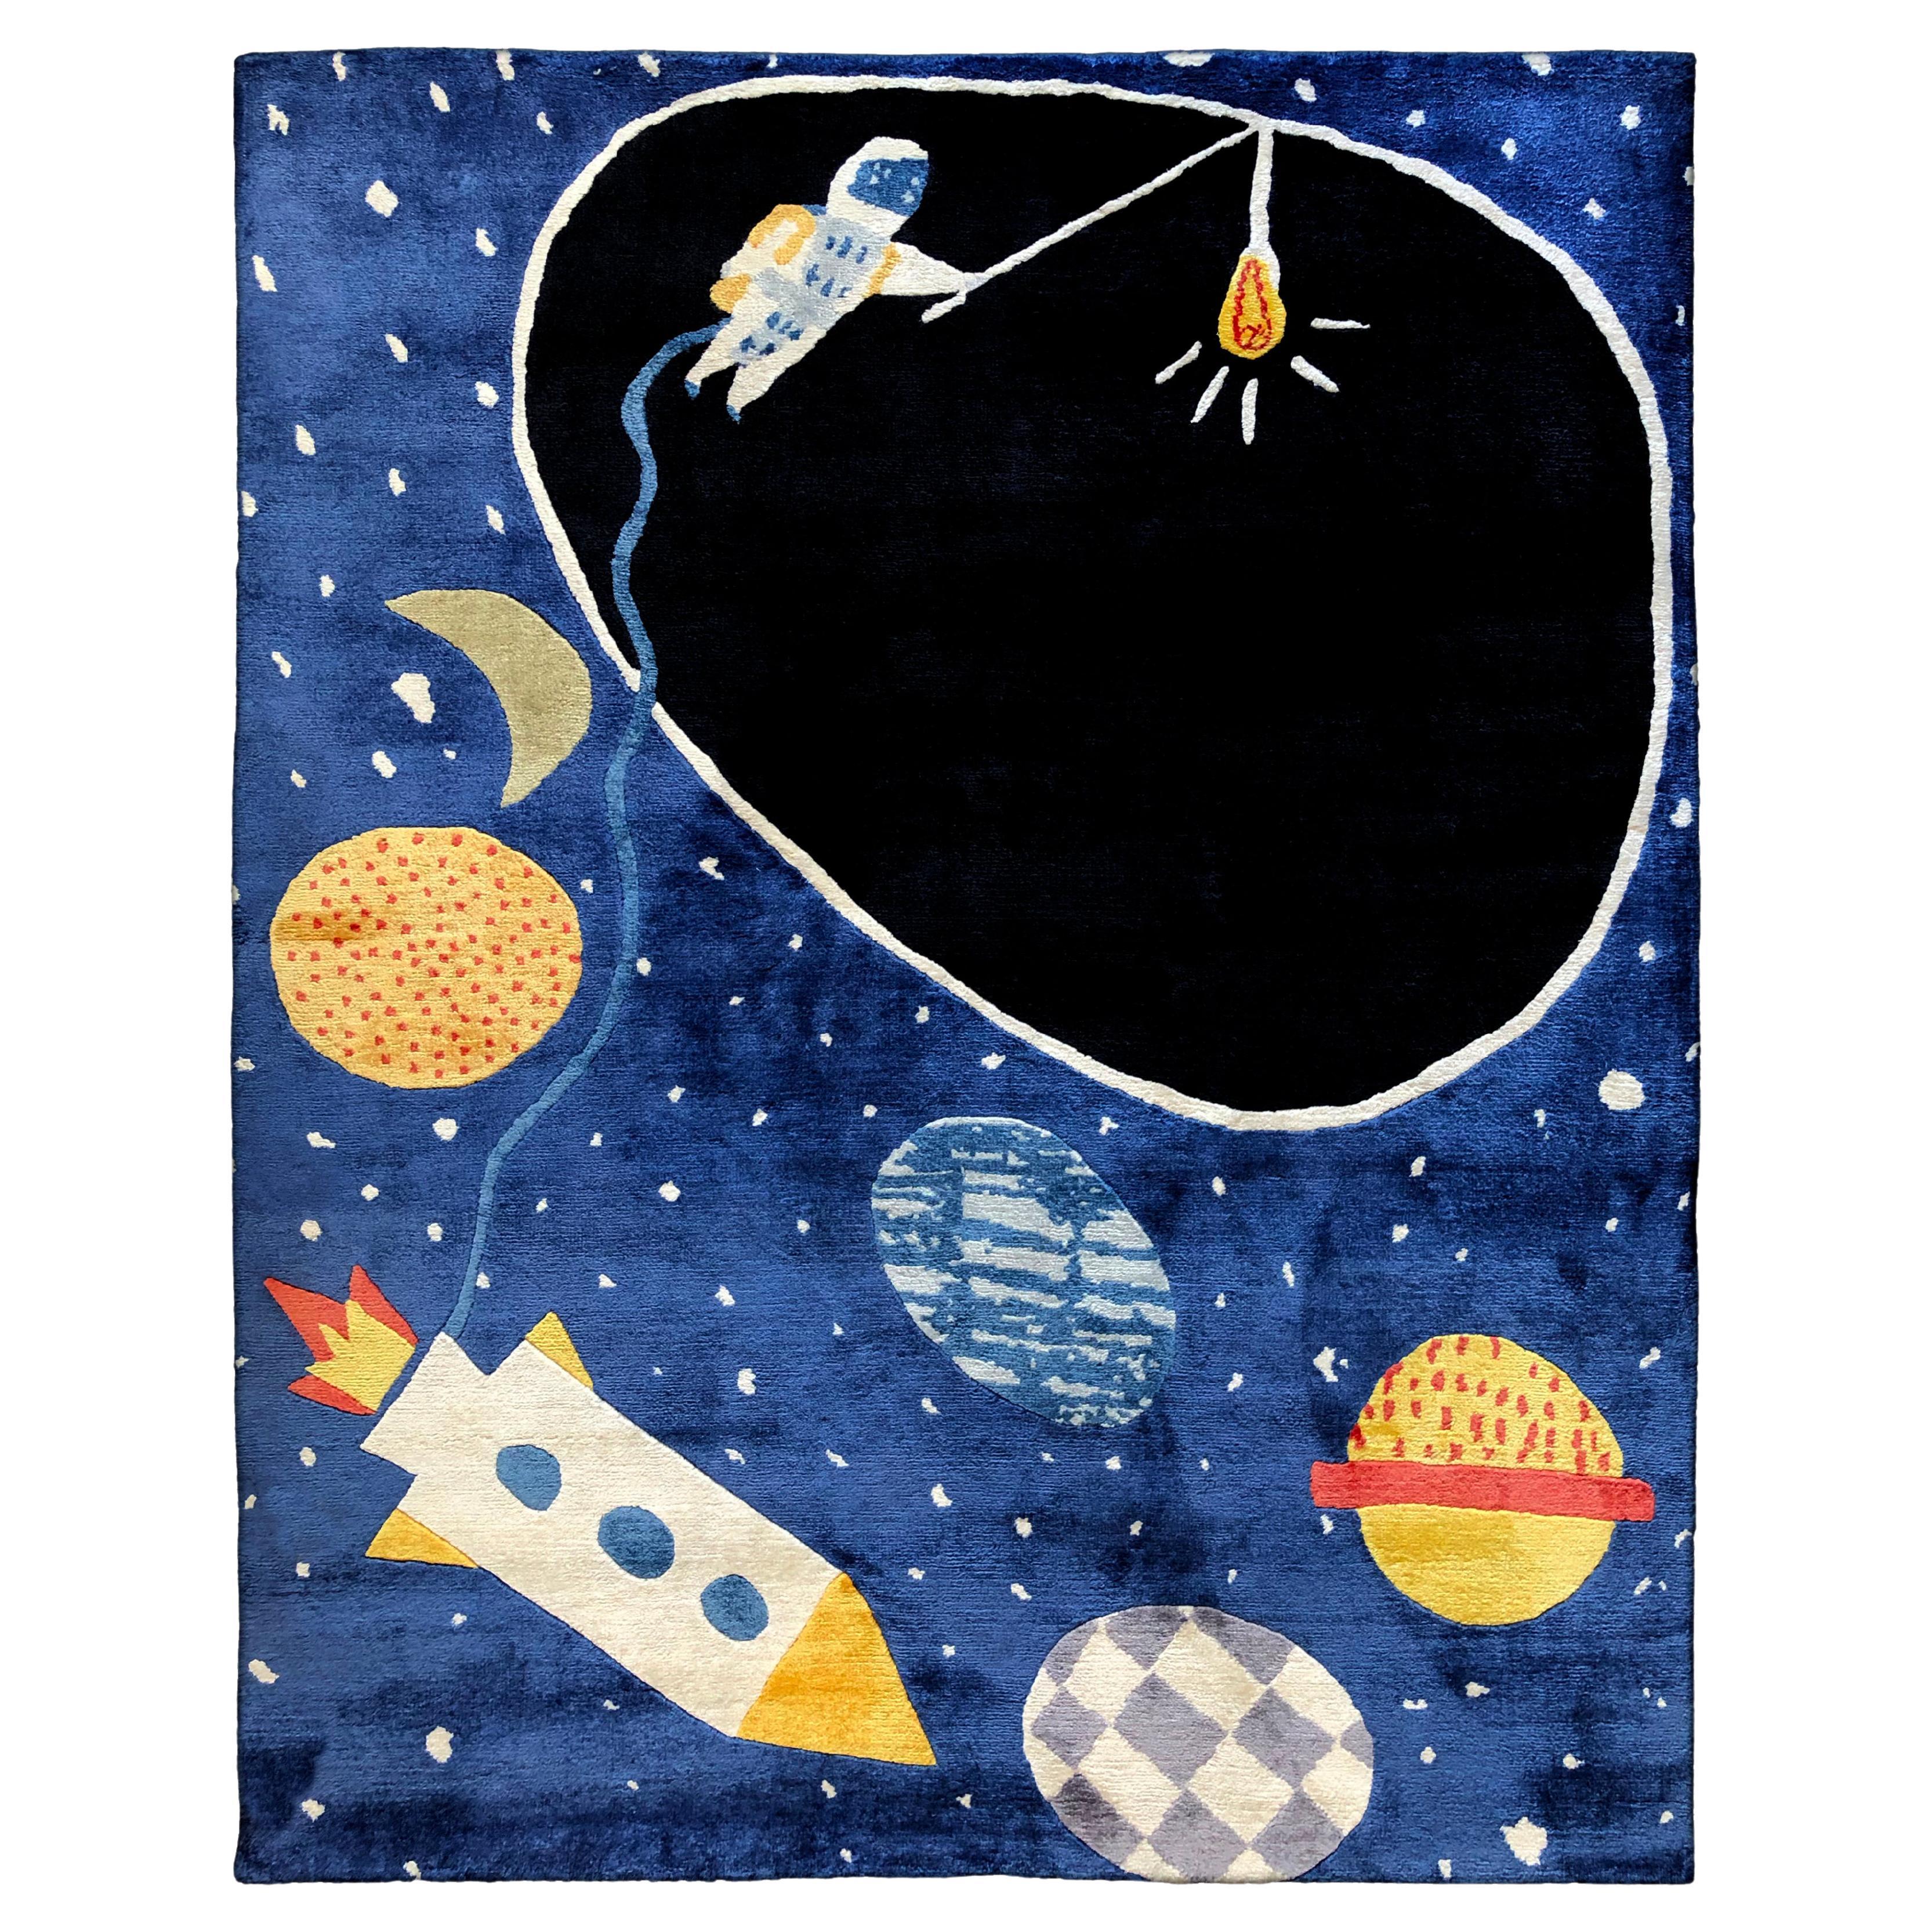 Space Ace Rug by Daria Solak, Hand Knotted, 100% New Zealand Wool 300x375cm For Sale